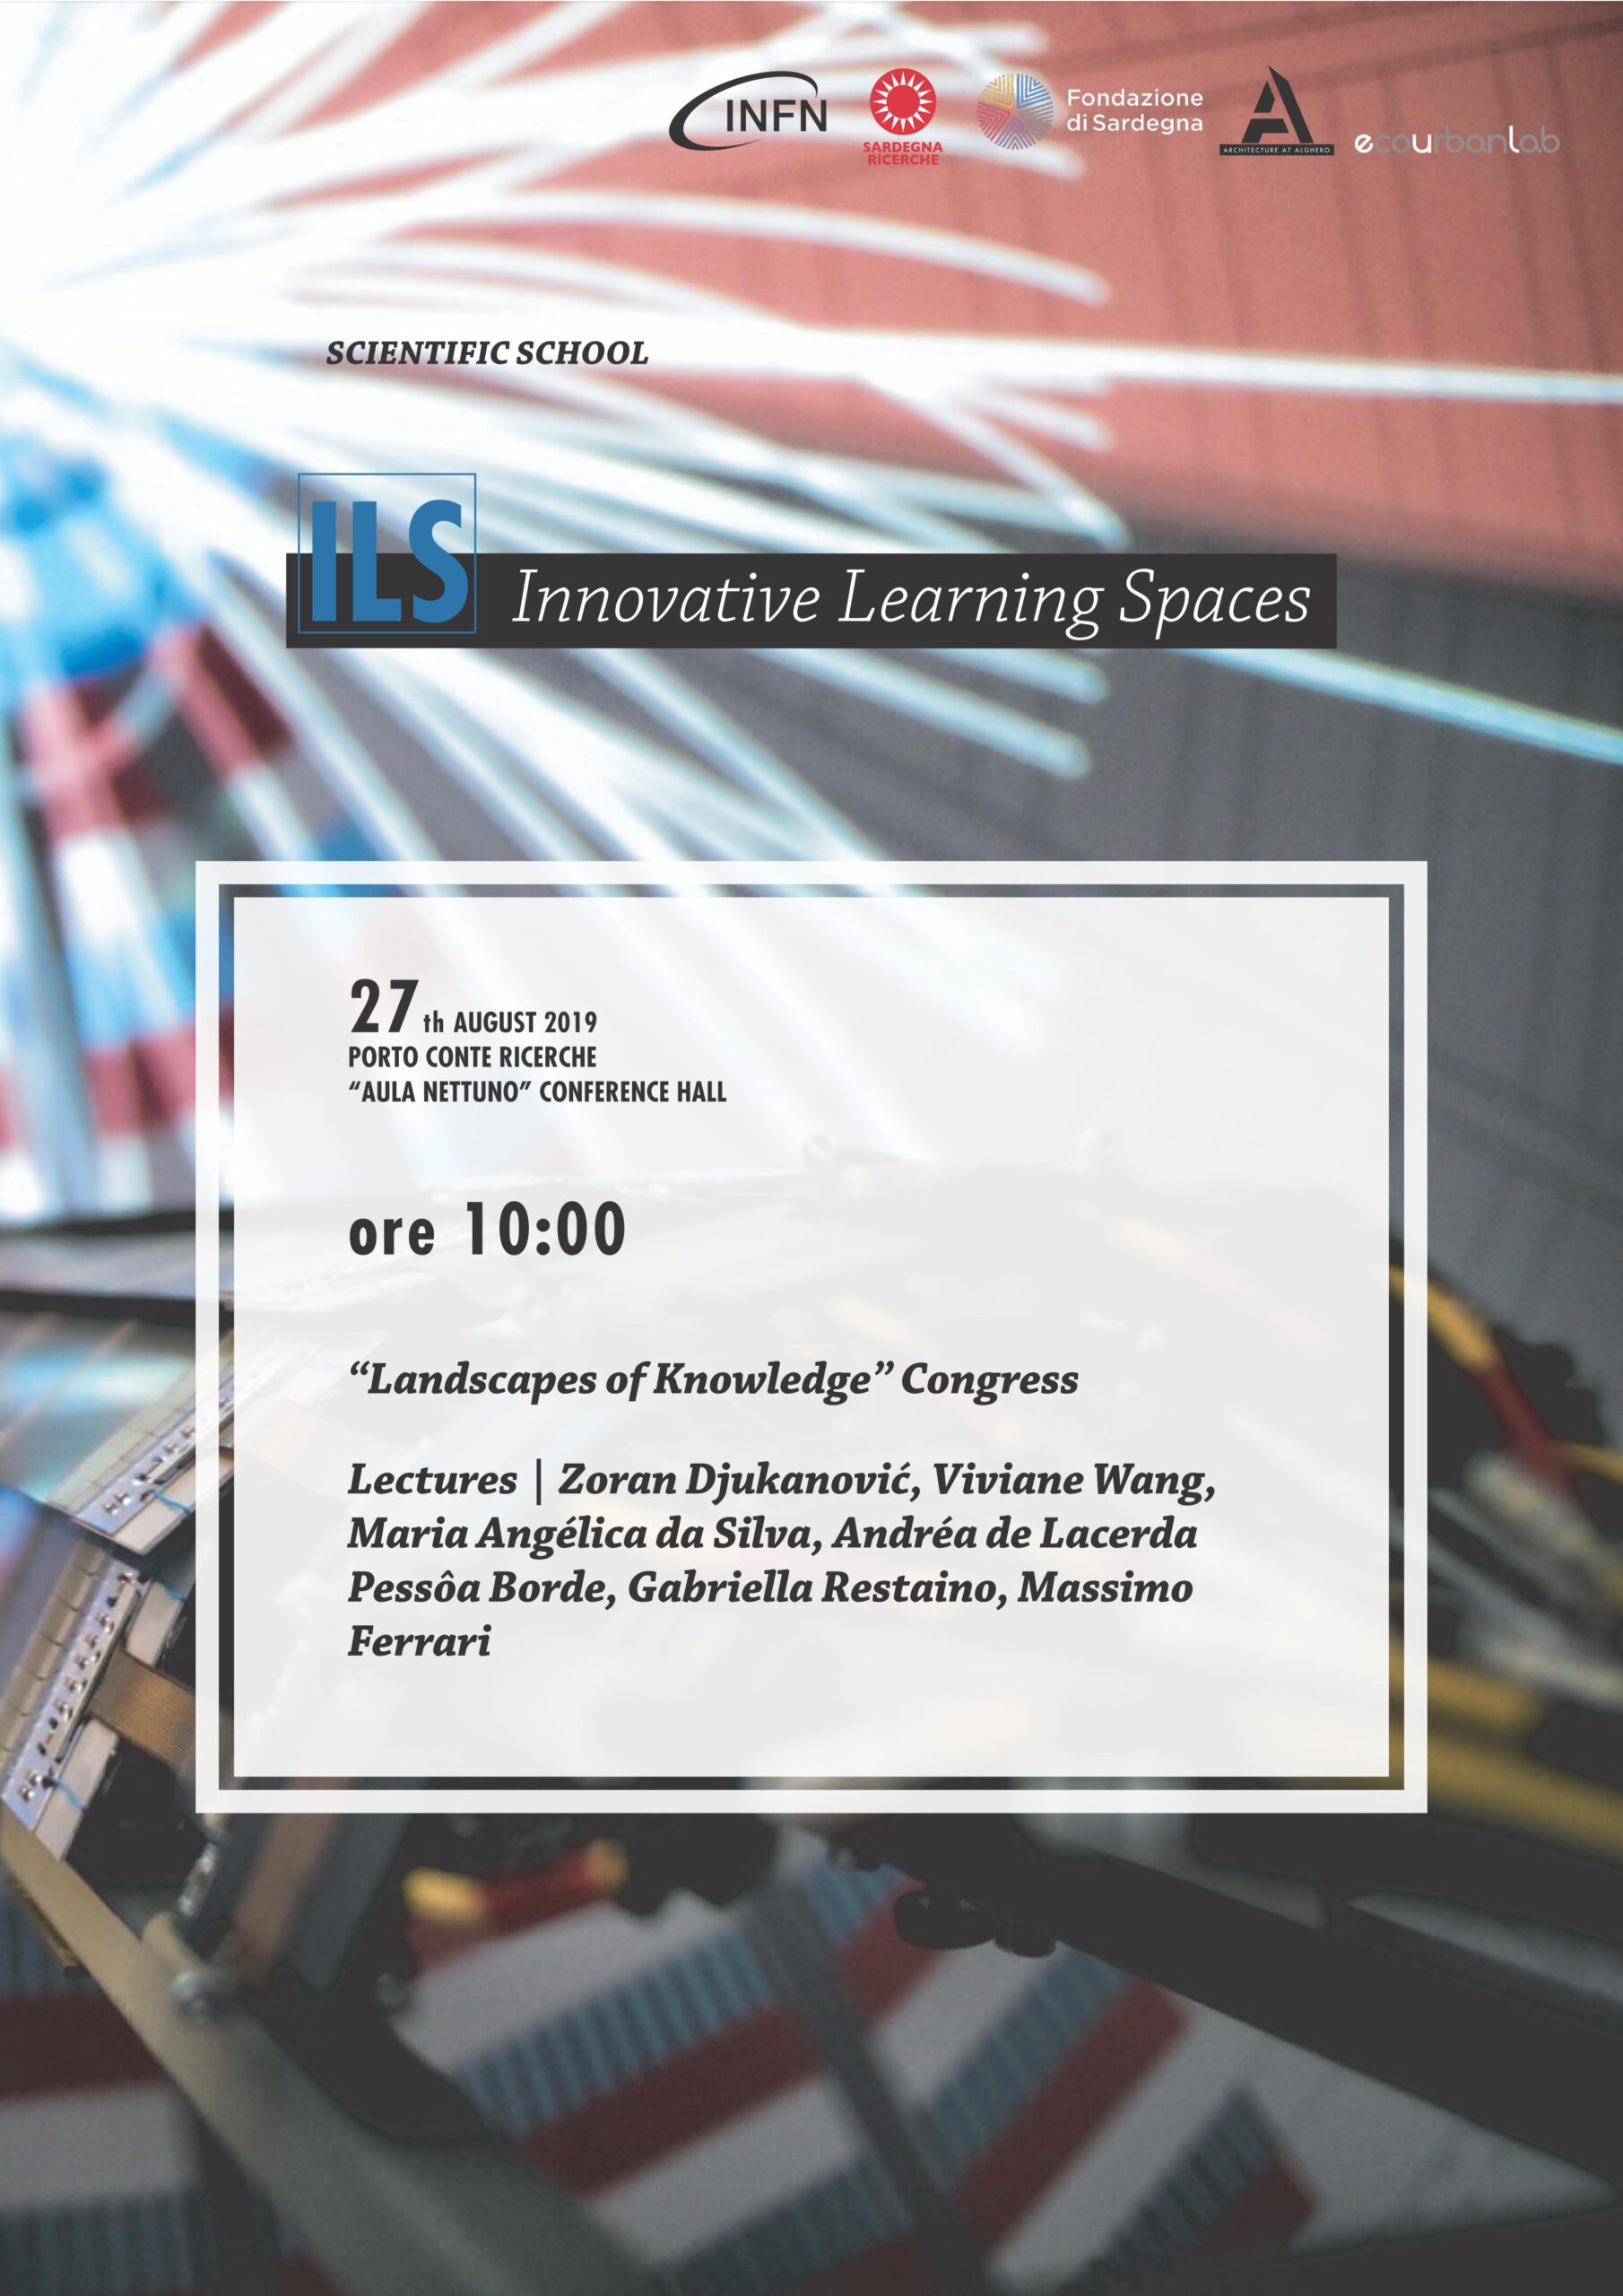 “Landscapes of Knowledge” Congress